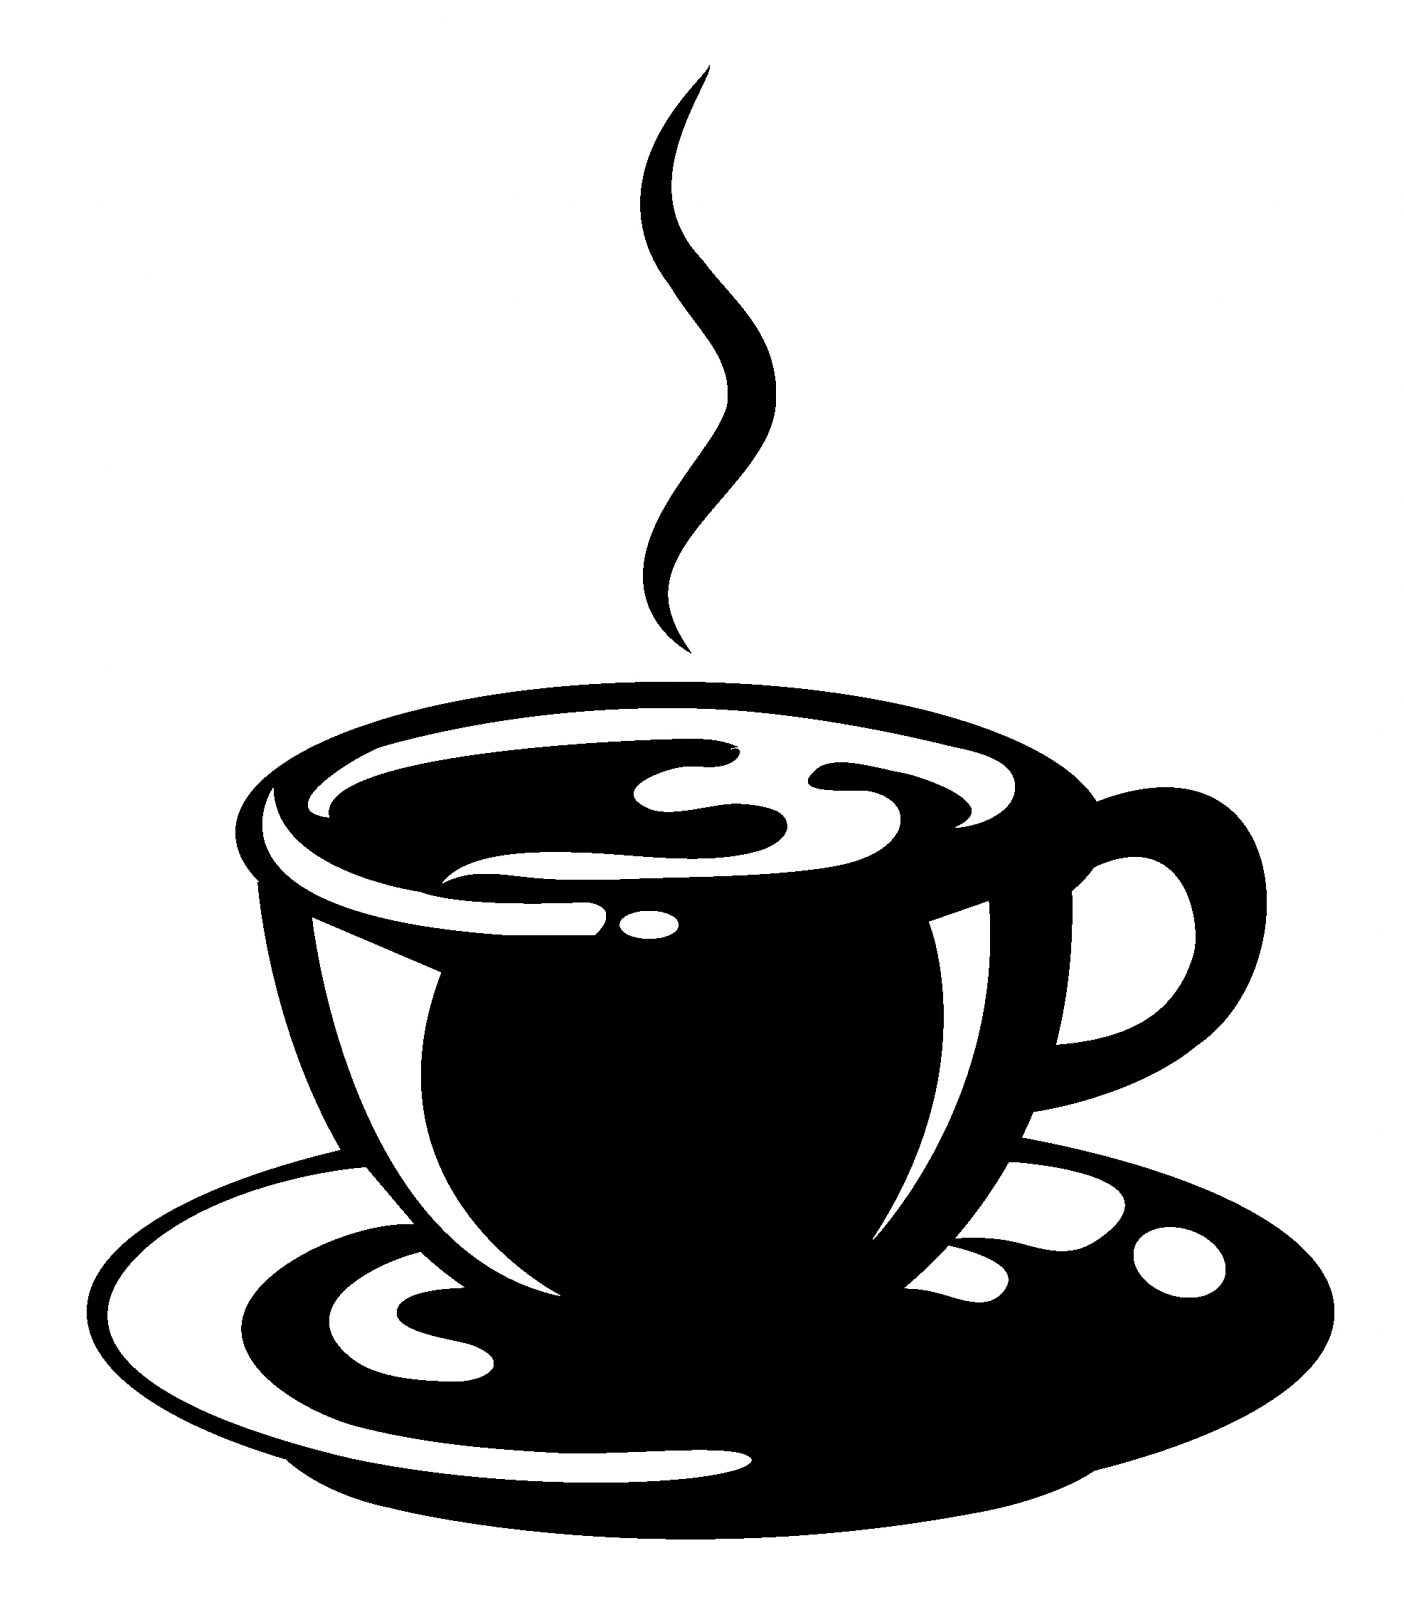 Coffee Cup Clip Art to Download - dbclipart.com